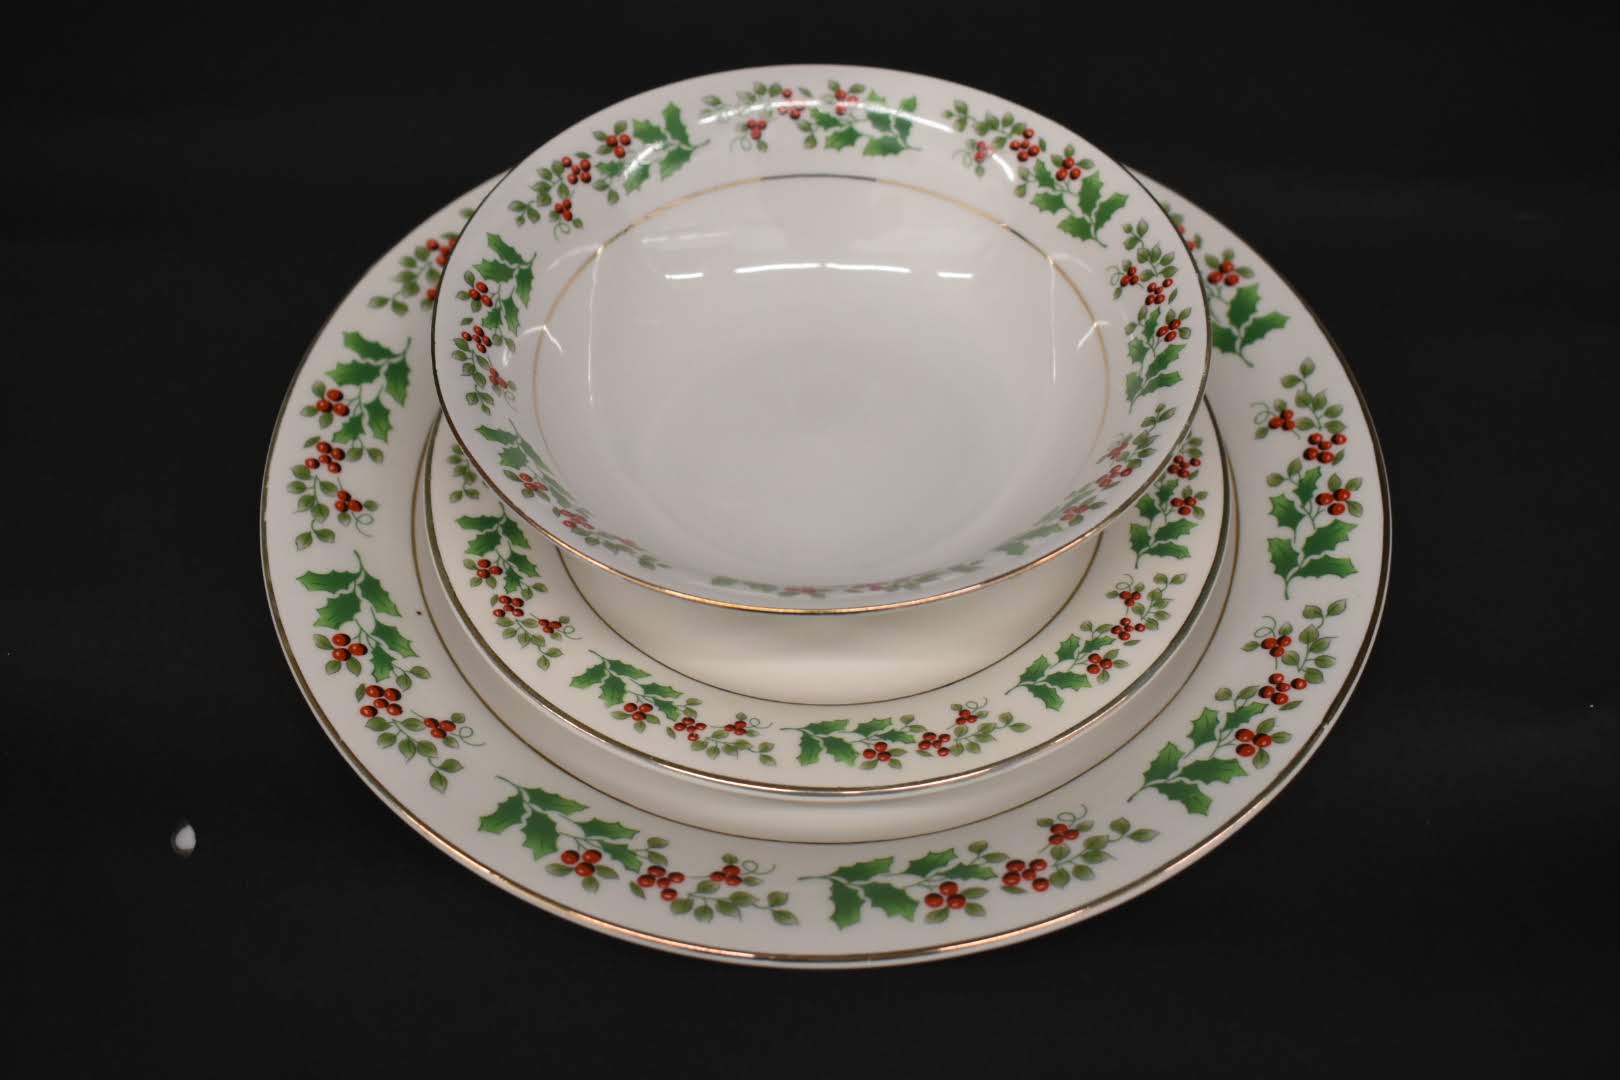 Holiday Holly Pattern - Mid Century Gold Trim Porcelain Fine China - 3 Piece Dinner Set